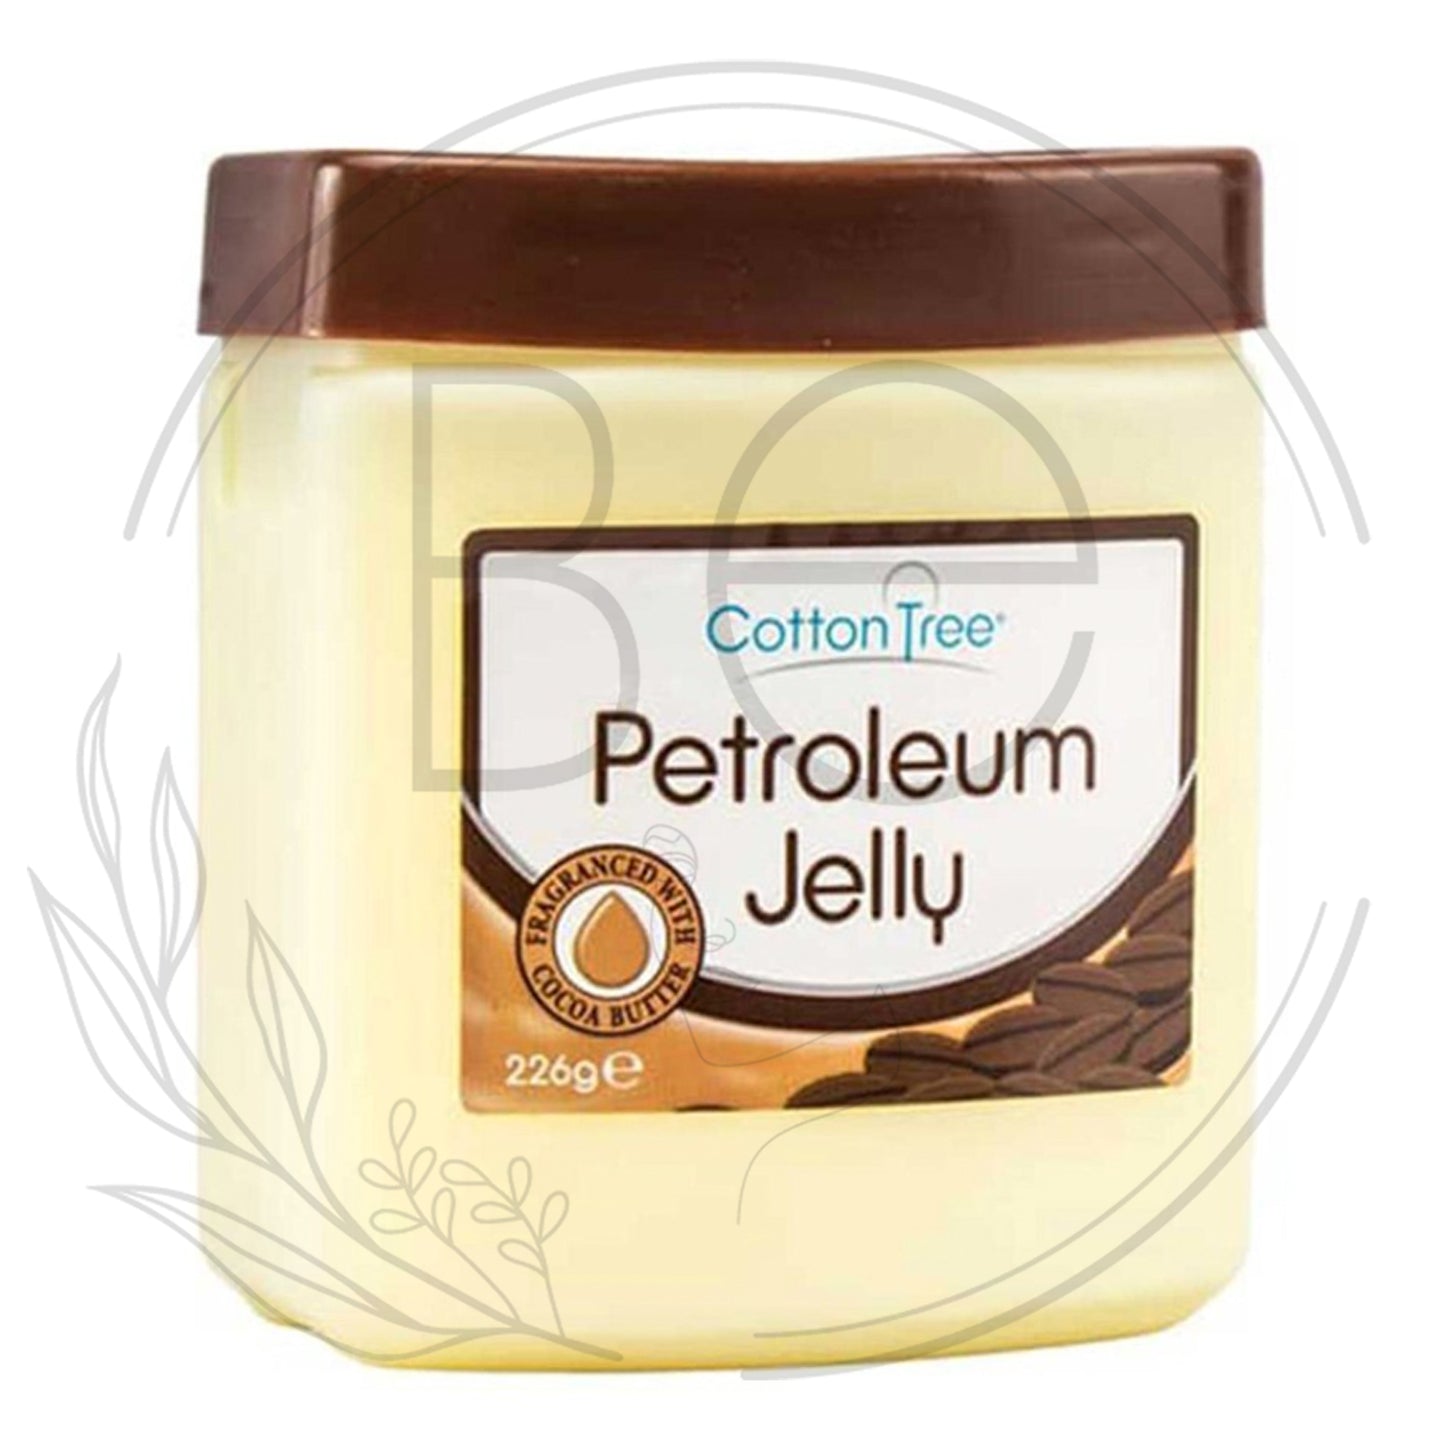 Coco Butter Petroleum Jelly 226g